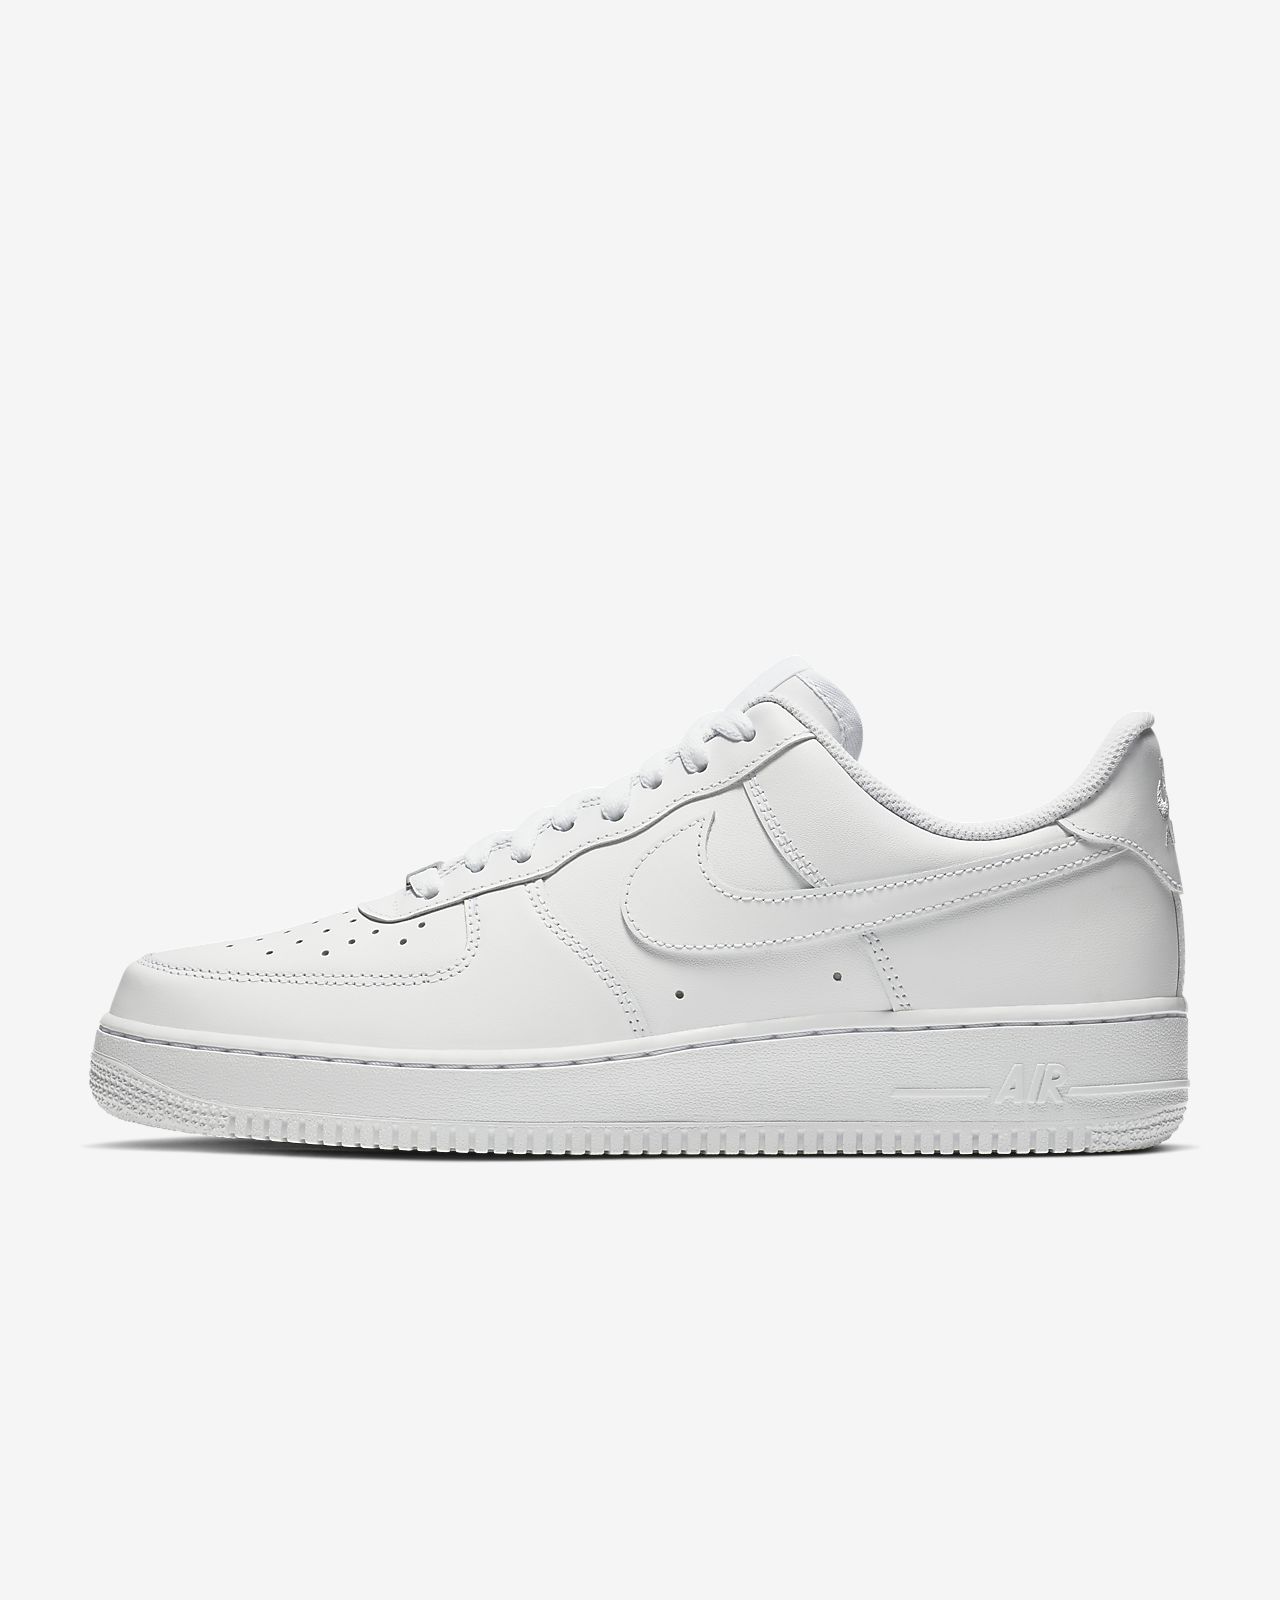 chaussure nike air force 1 rouge et blanche